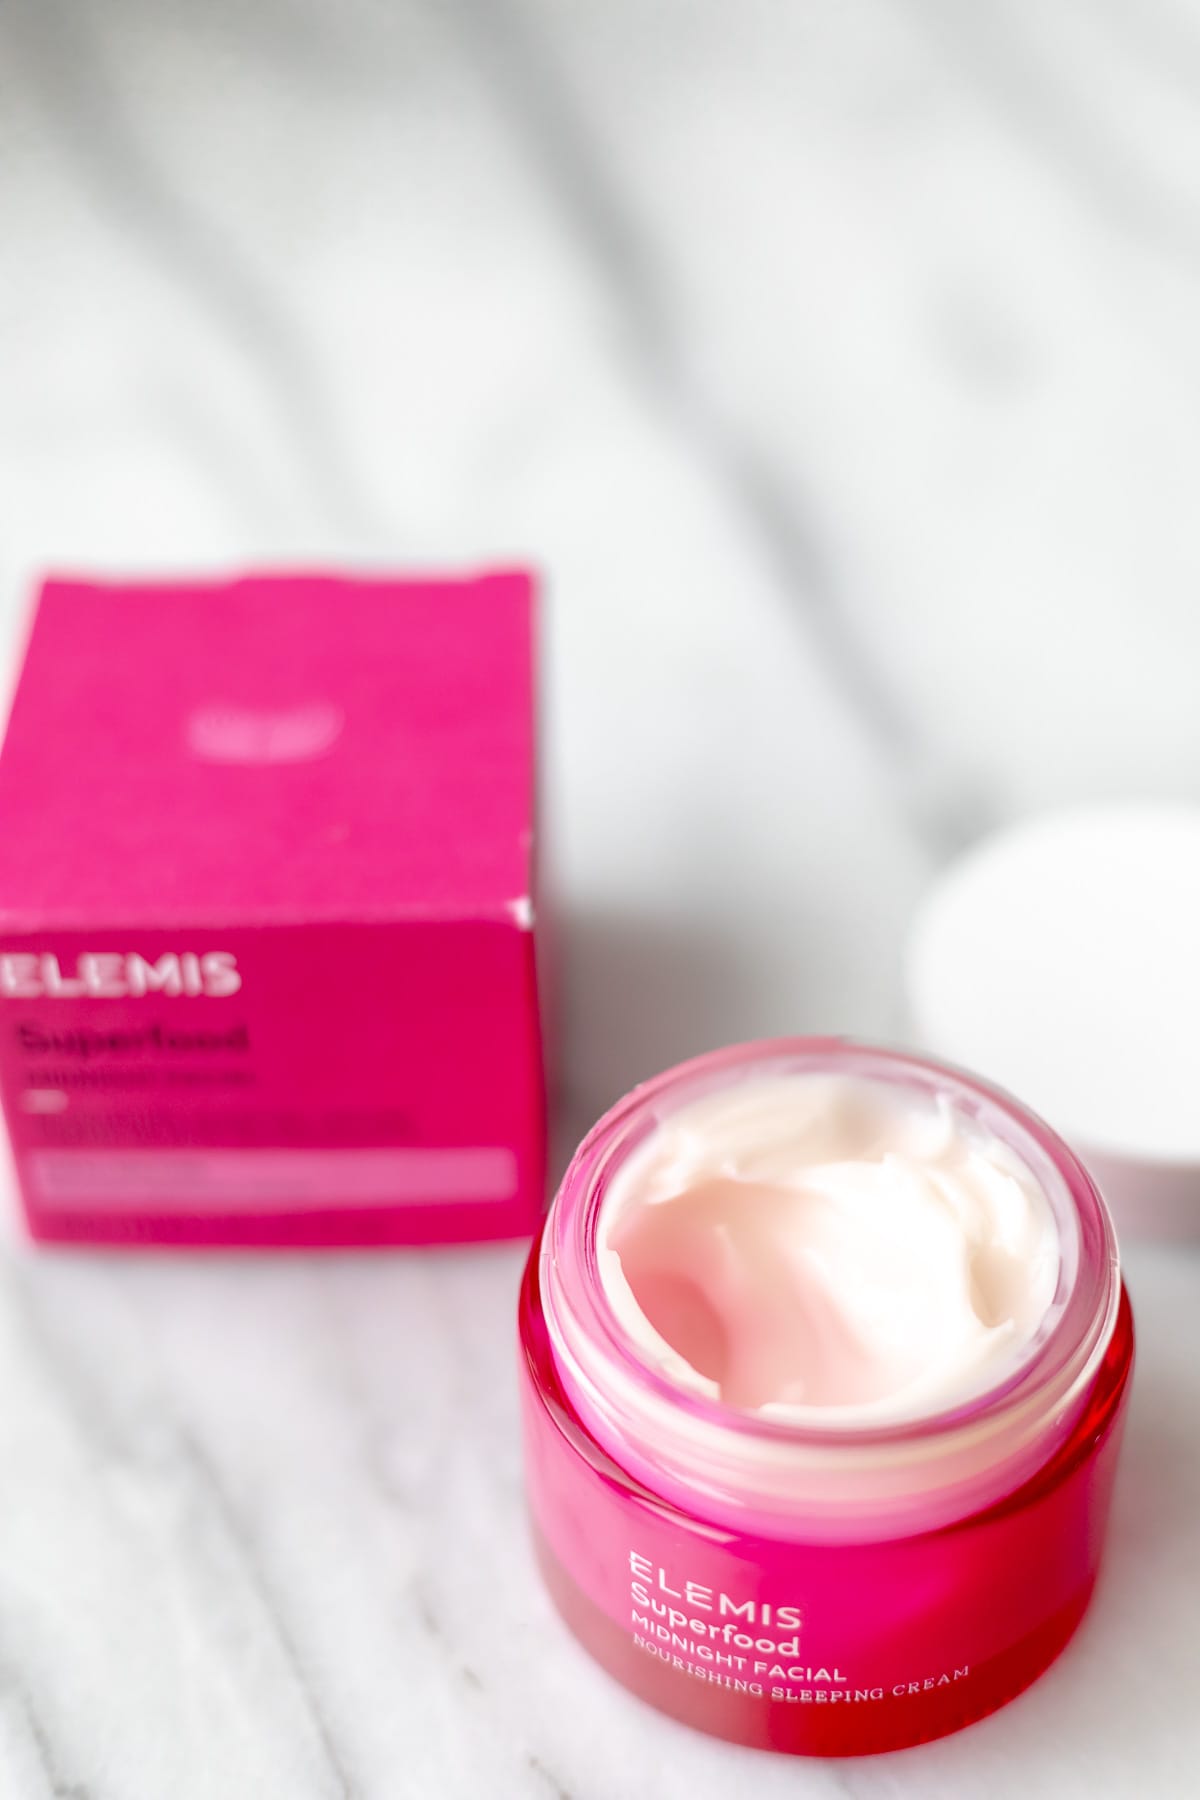 An opened jar of ELEMIS Midnight Facial with the box behind it on a marble background.